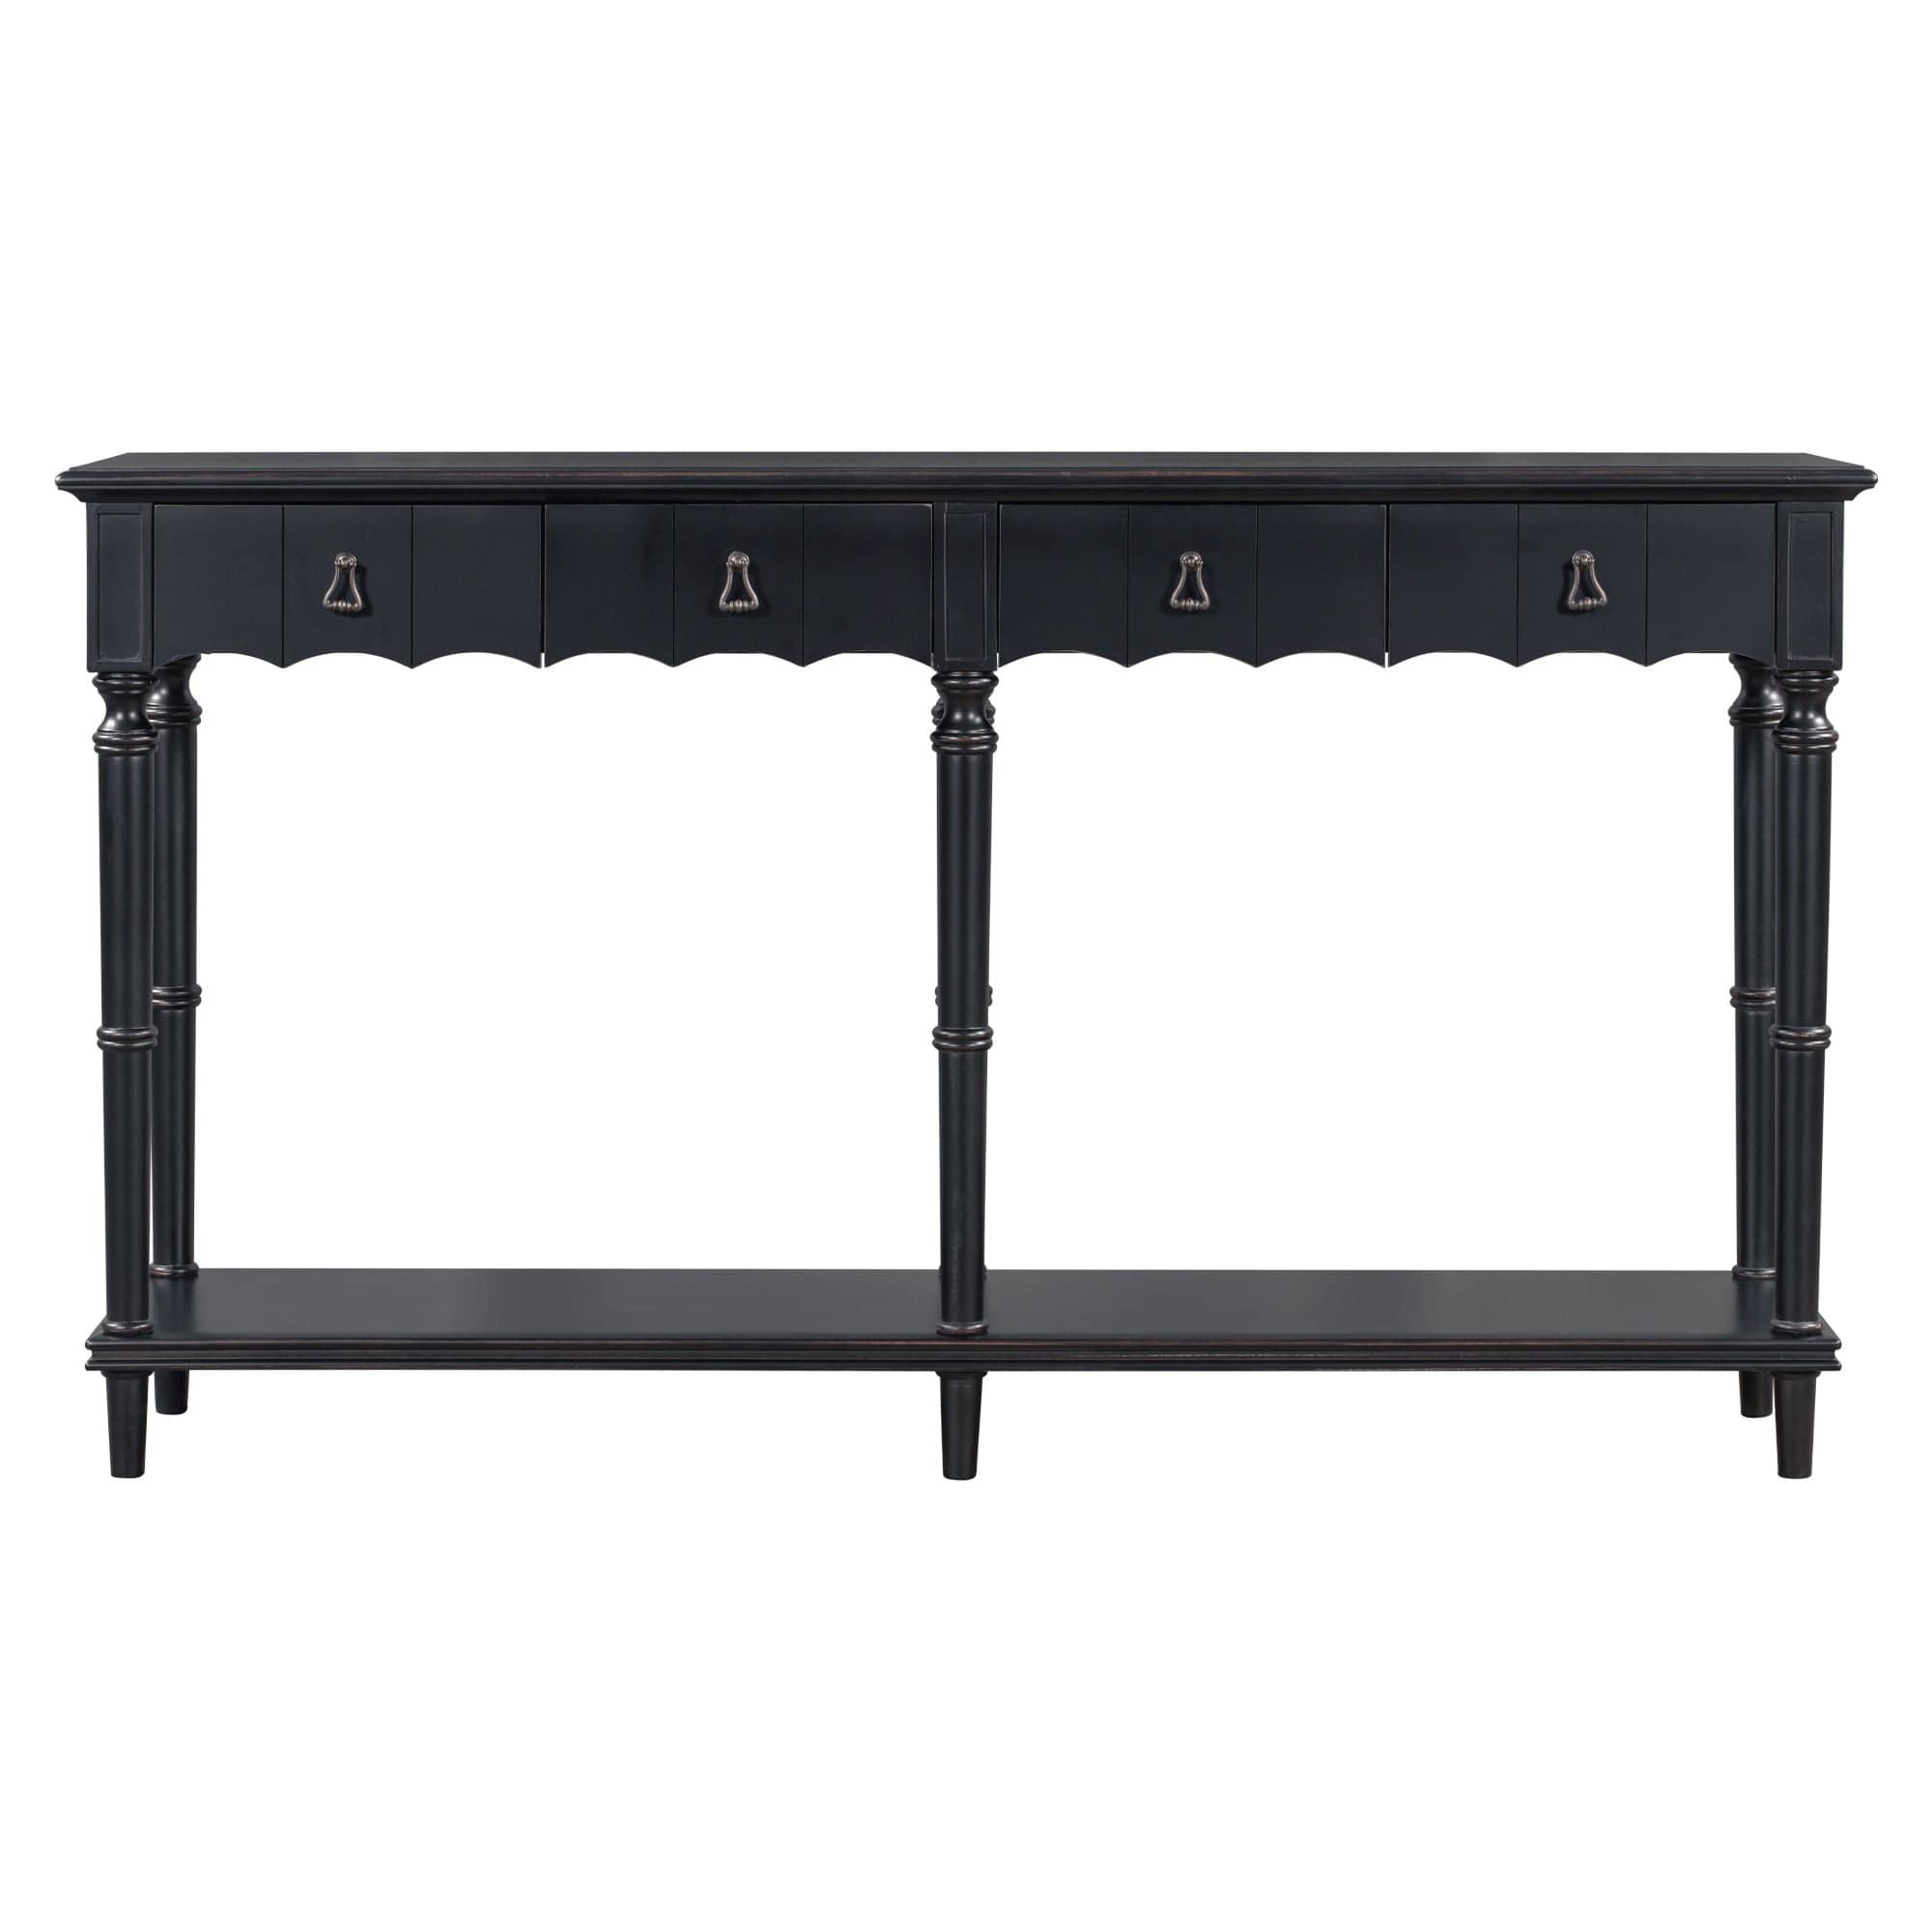 Shop 【Not allowed to sell to Wayfair】【请不要上架至Wayfair平台】 U_STYLE  Country Console Table for Hallway Living Room Bedroom with 4 Front Facing Storage Drawers and 1 Shelf Mademoiselle Home Decor